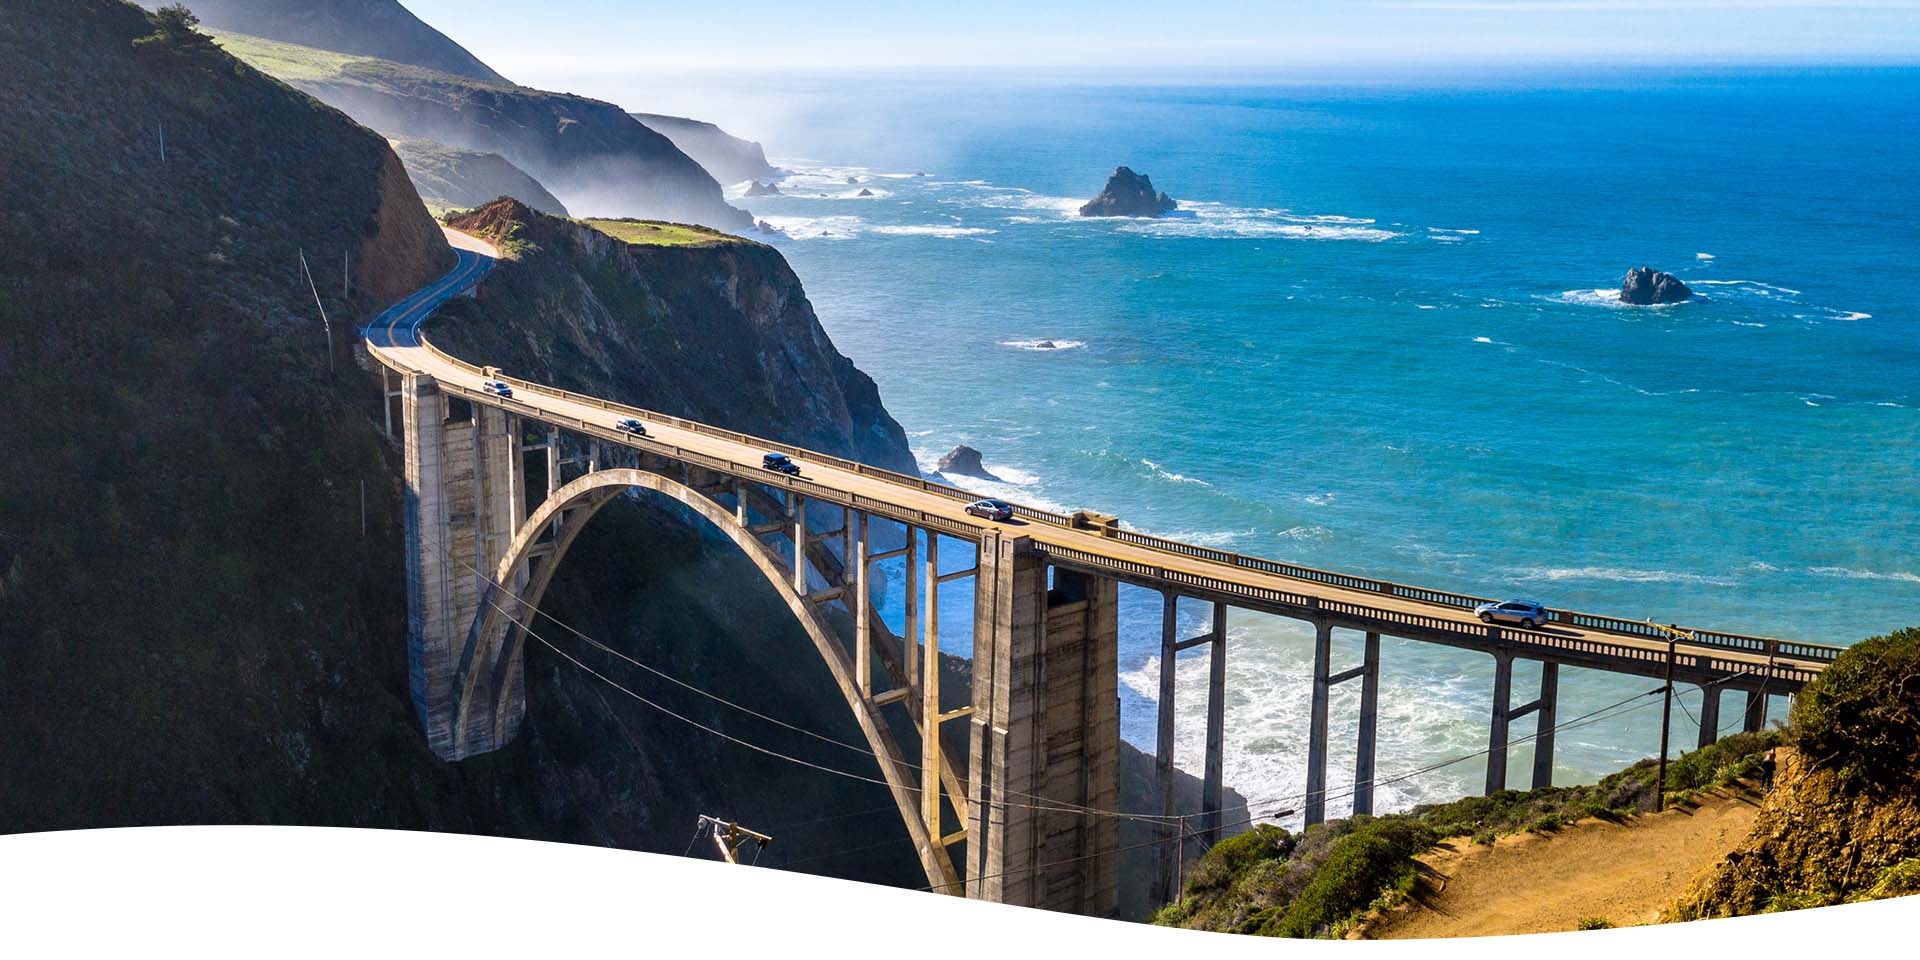 The Complete Guide to Your Pacific Coast Highway Road Trip